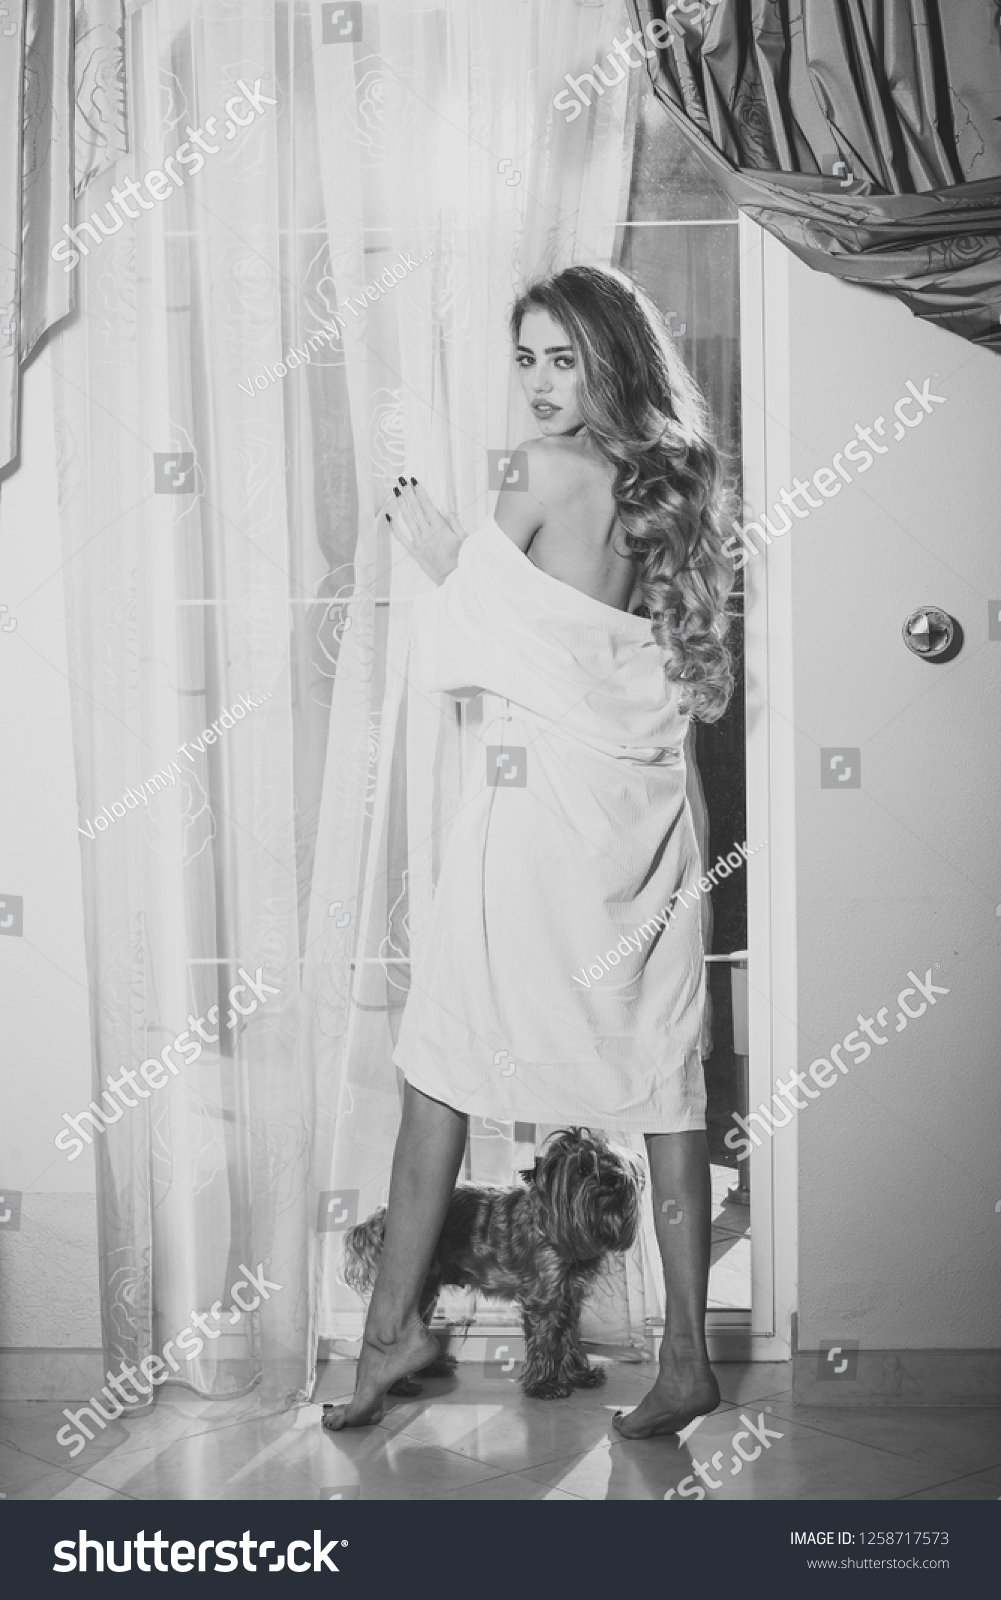 Lady with pensive face in bathrobe with nude shoulders. Girl enjoys morning near window with her cute dog. Sexy nude woman with long hair looks hot and desire. Attraction and desire concept. #1258717573